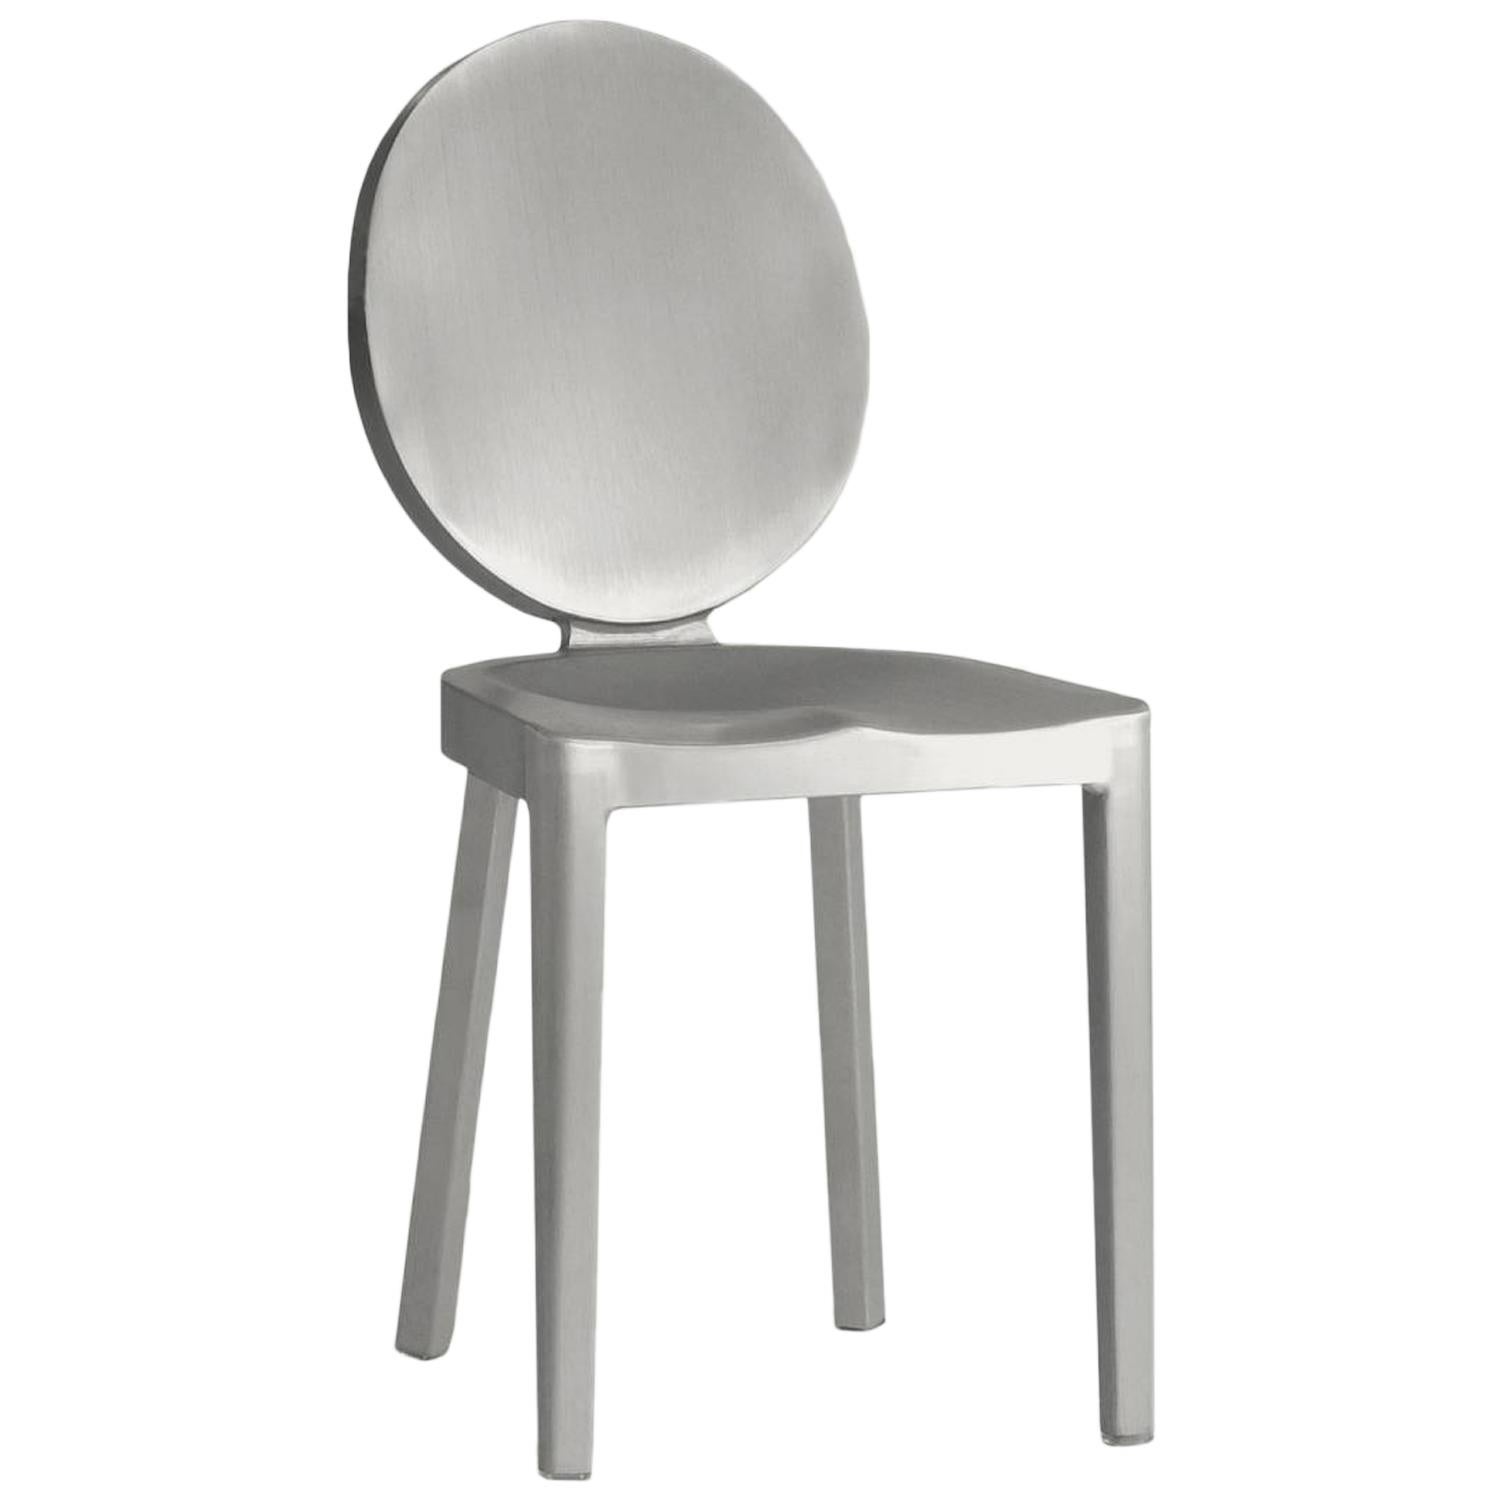 Emeco Kong Chair in Brushed Aluminum by Philippe Starck